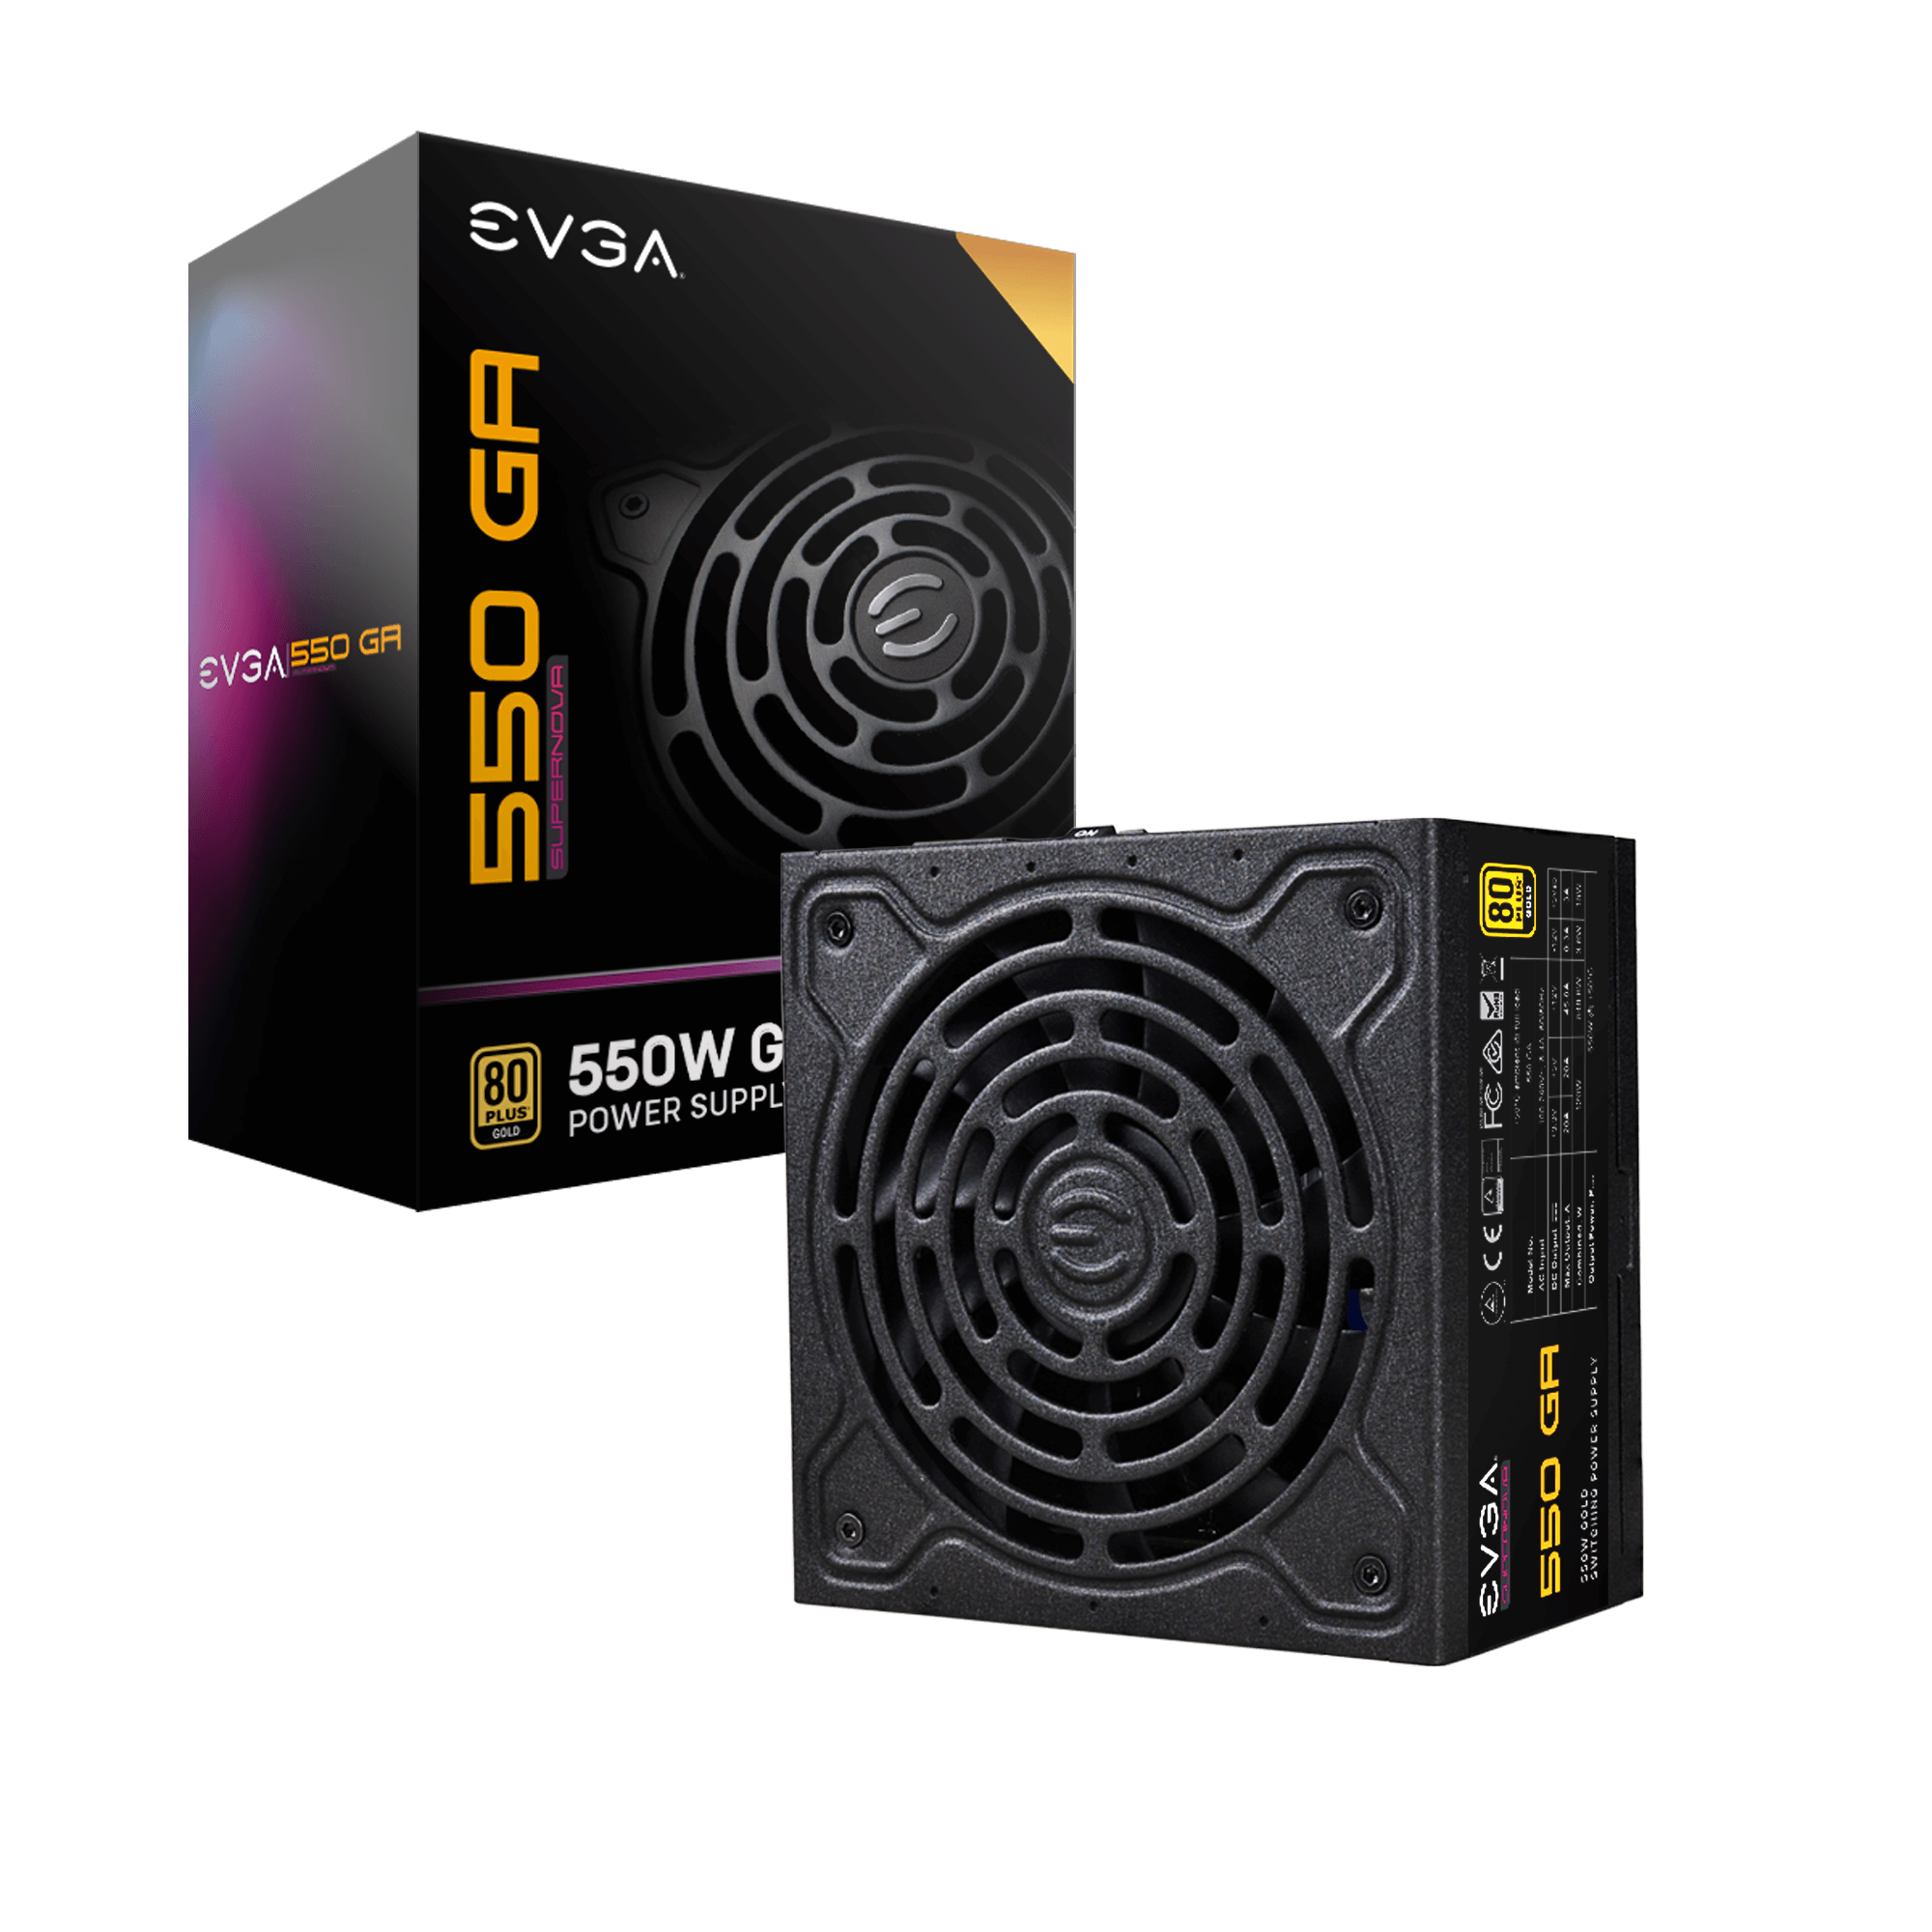 https://images.evga.com/products/gallery/png/220-GA-0550-X1_XL_1.png